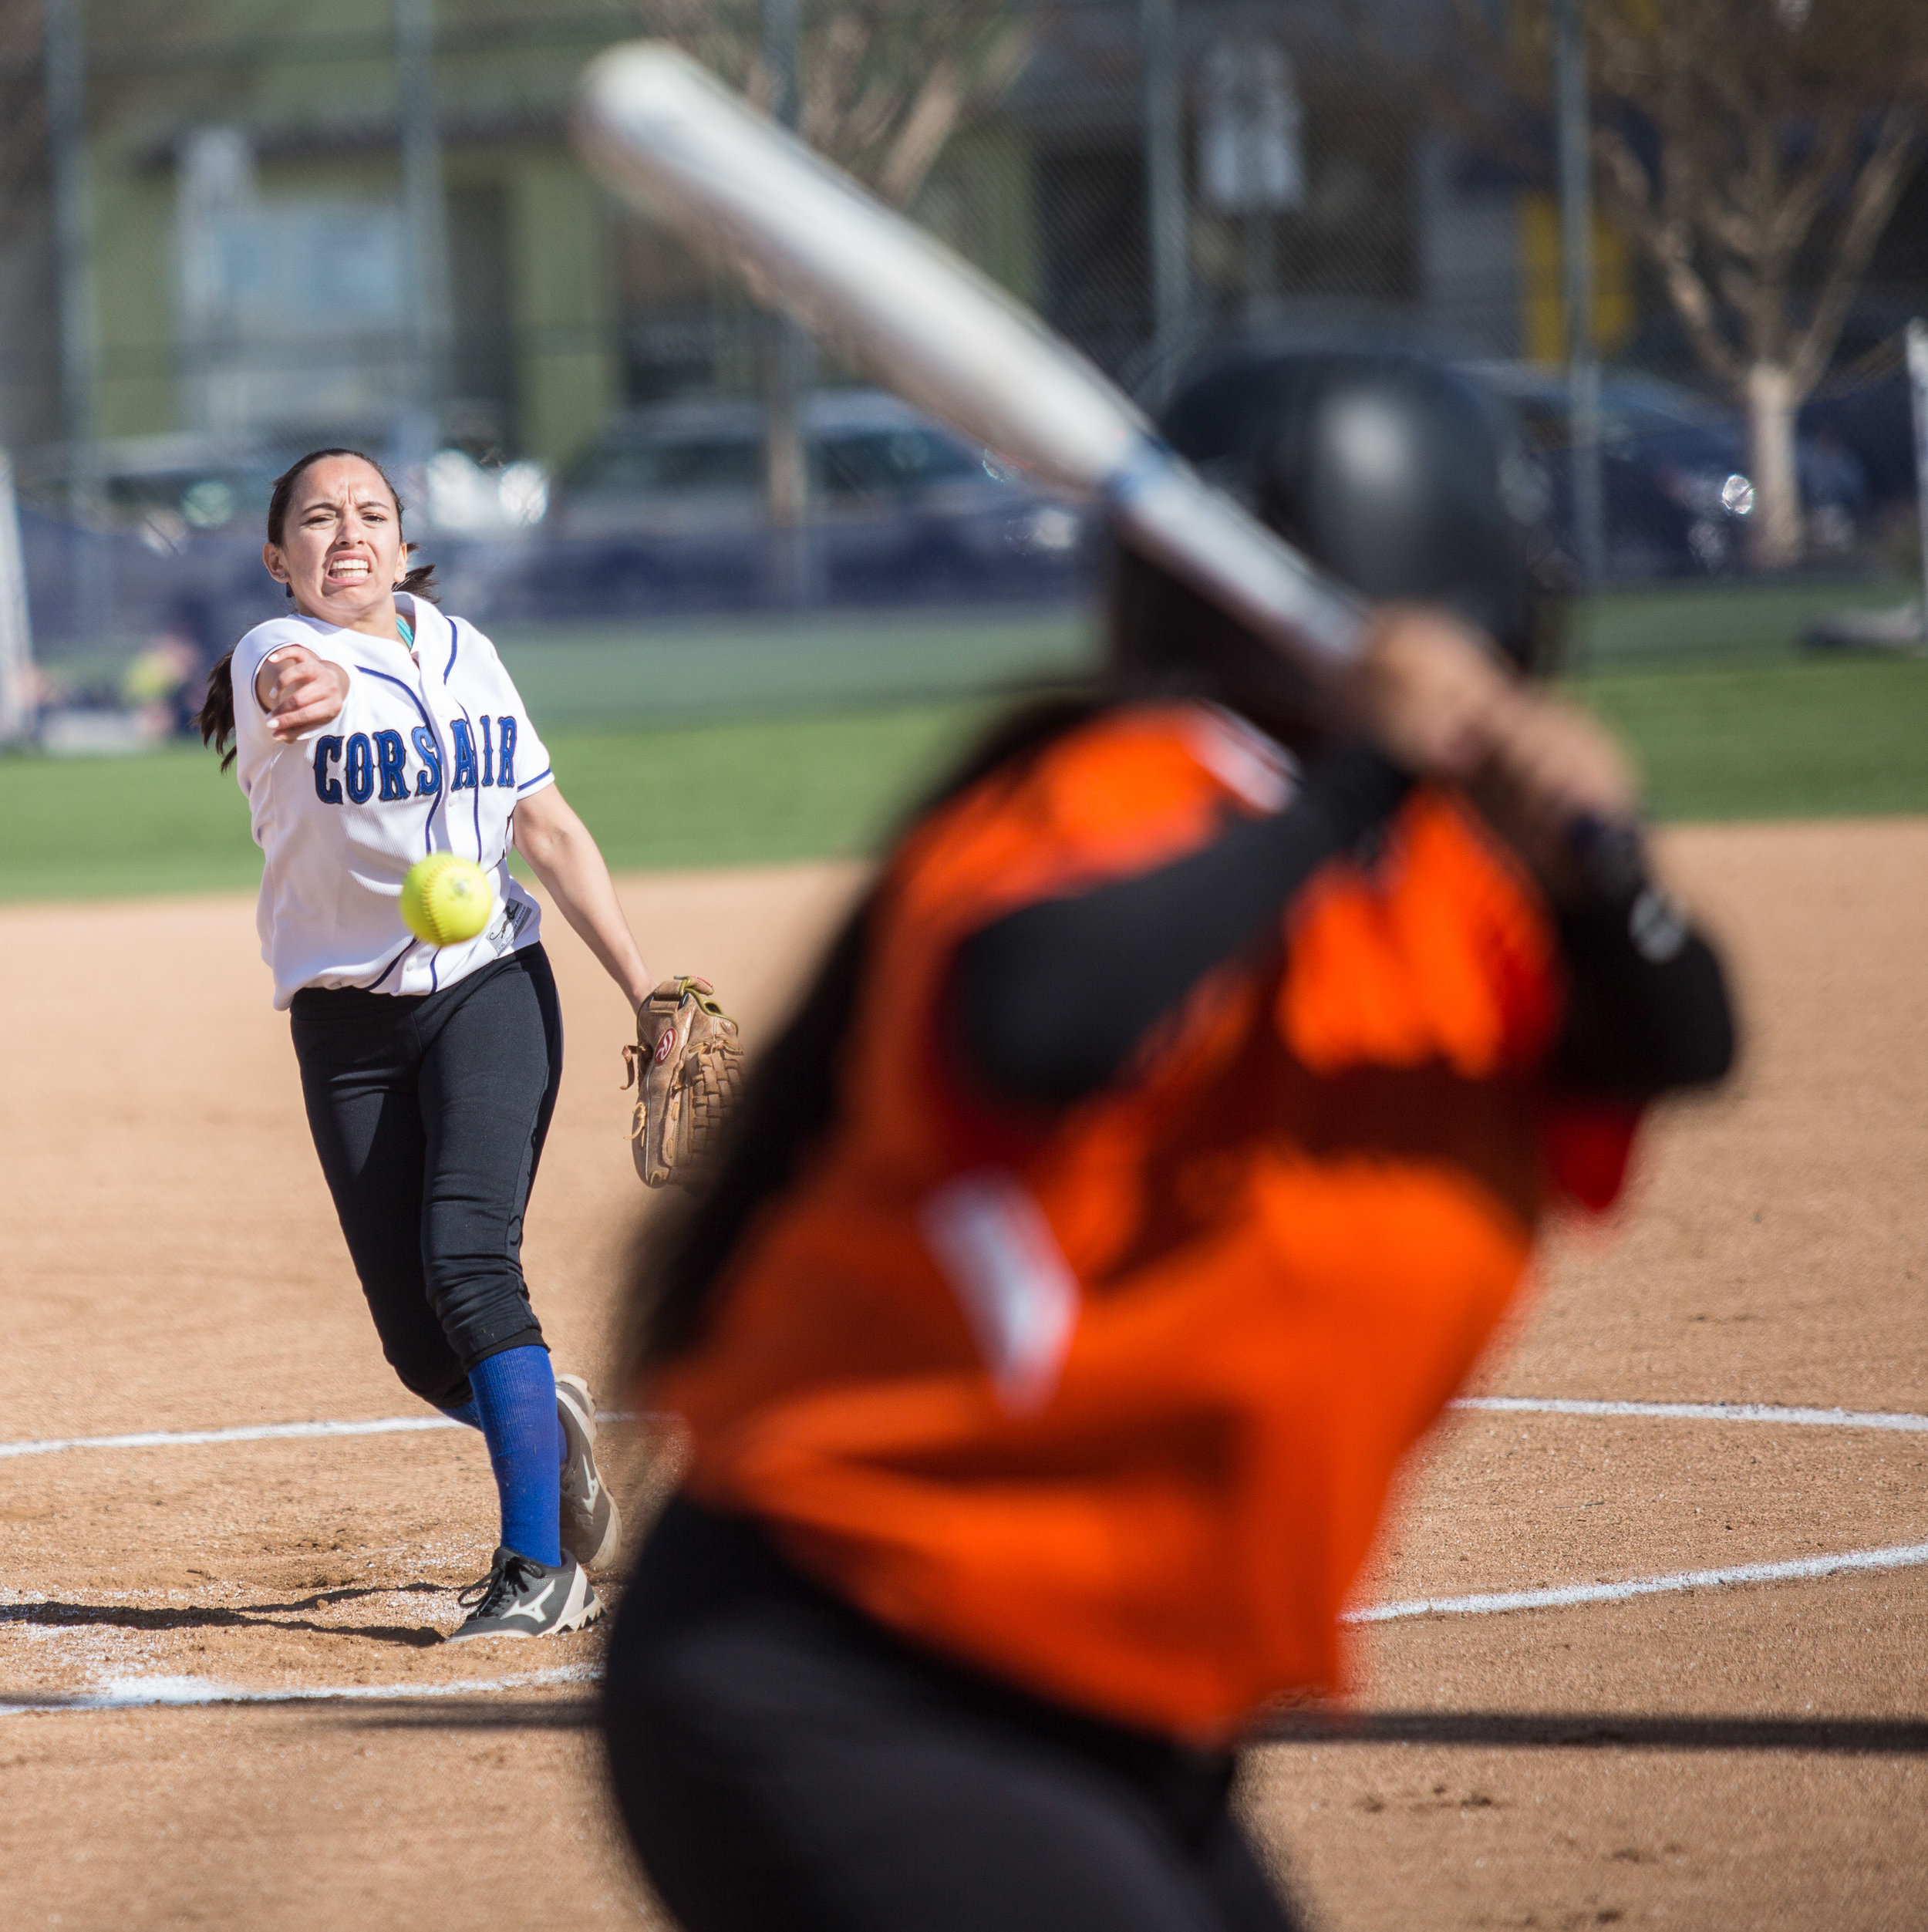  Santa Monica College Corsair freshman outfielder Cheryl Thomas #3(white, left) pitches a curve ball during the bottom of the 1st the ball at her Ventura College Pirate opponent at the Corsair Field in Santa Monica California, on Tuesday, February 27